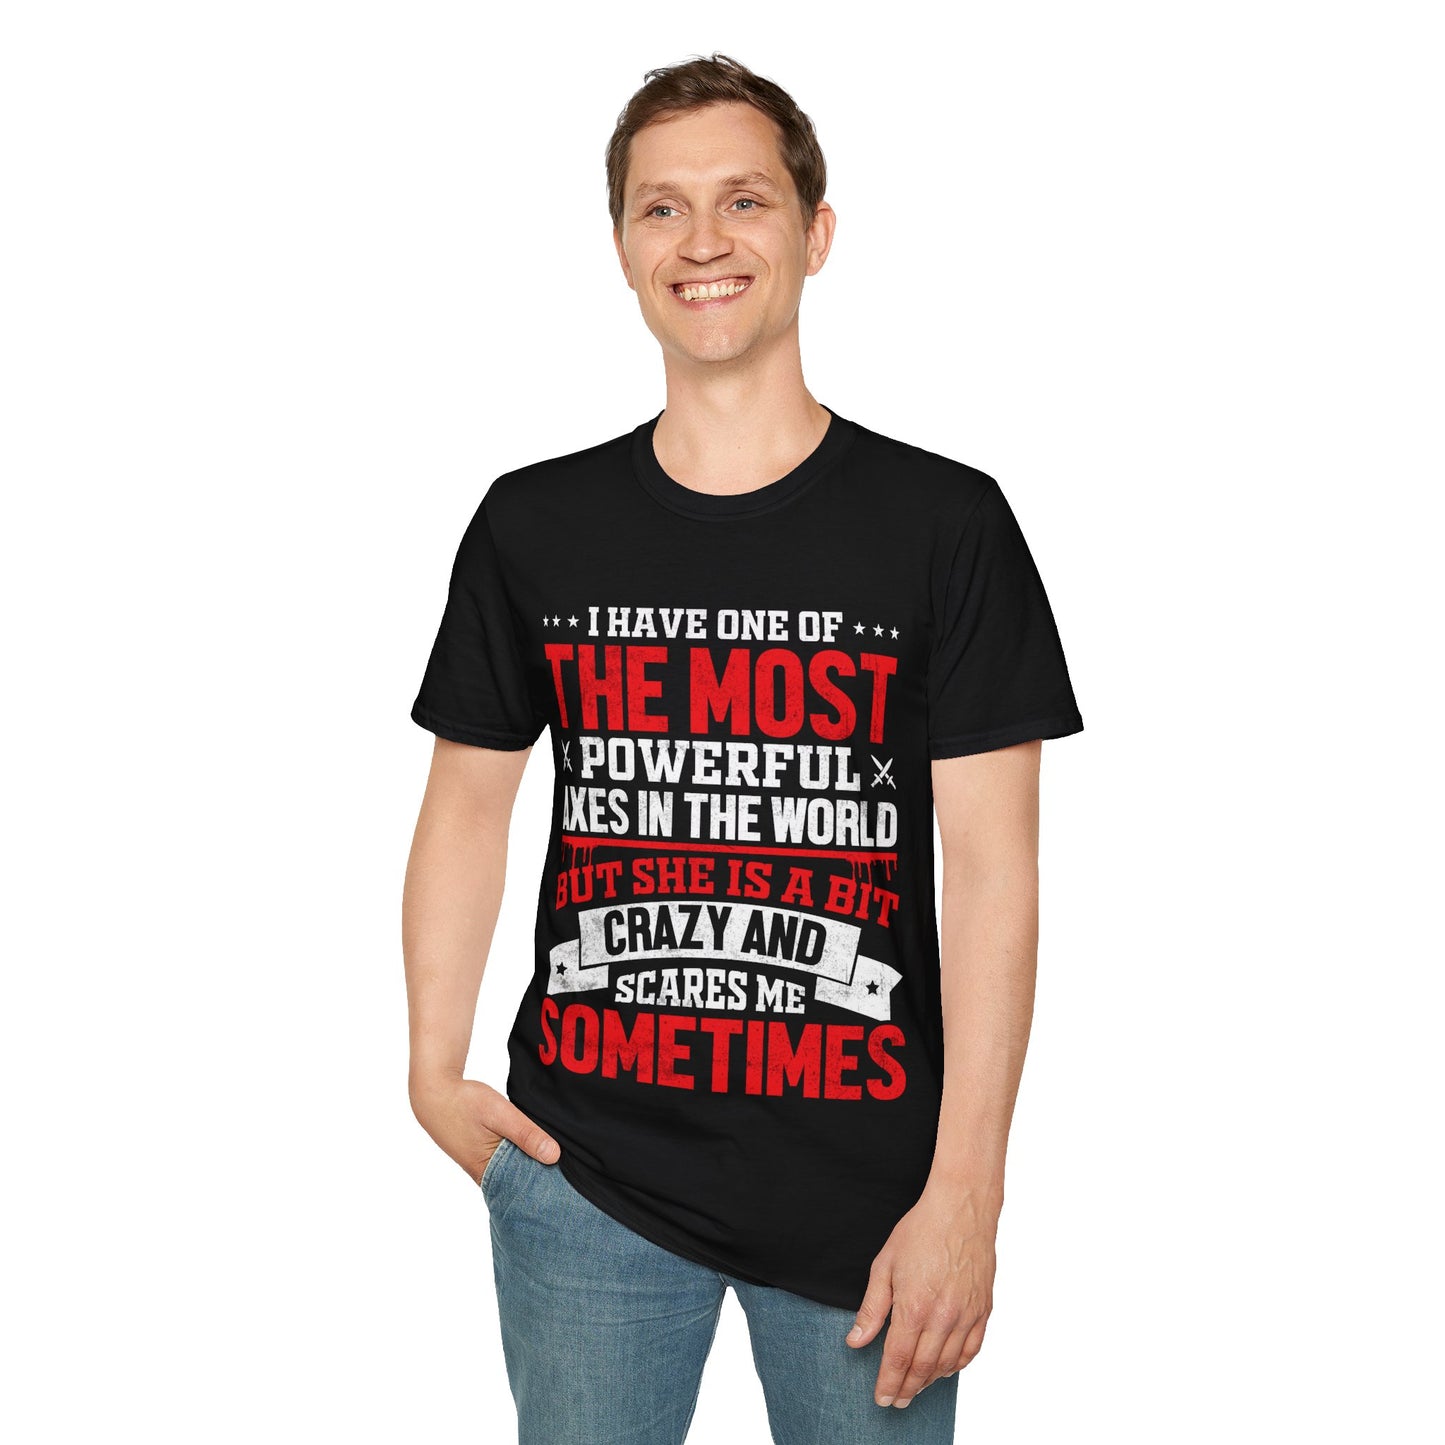 I Have One Of The Most Powerful Axes In The World But She Is A Bit Crazy And Scares Me Sometimes T-Shirt